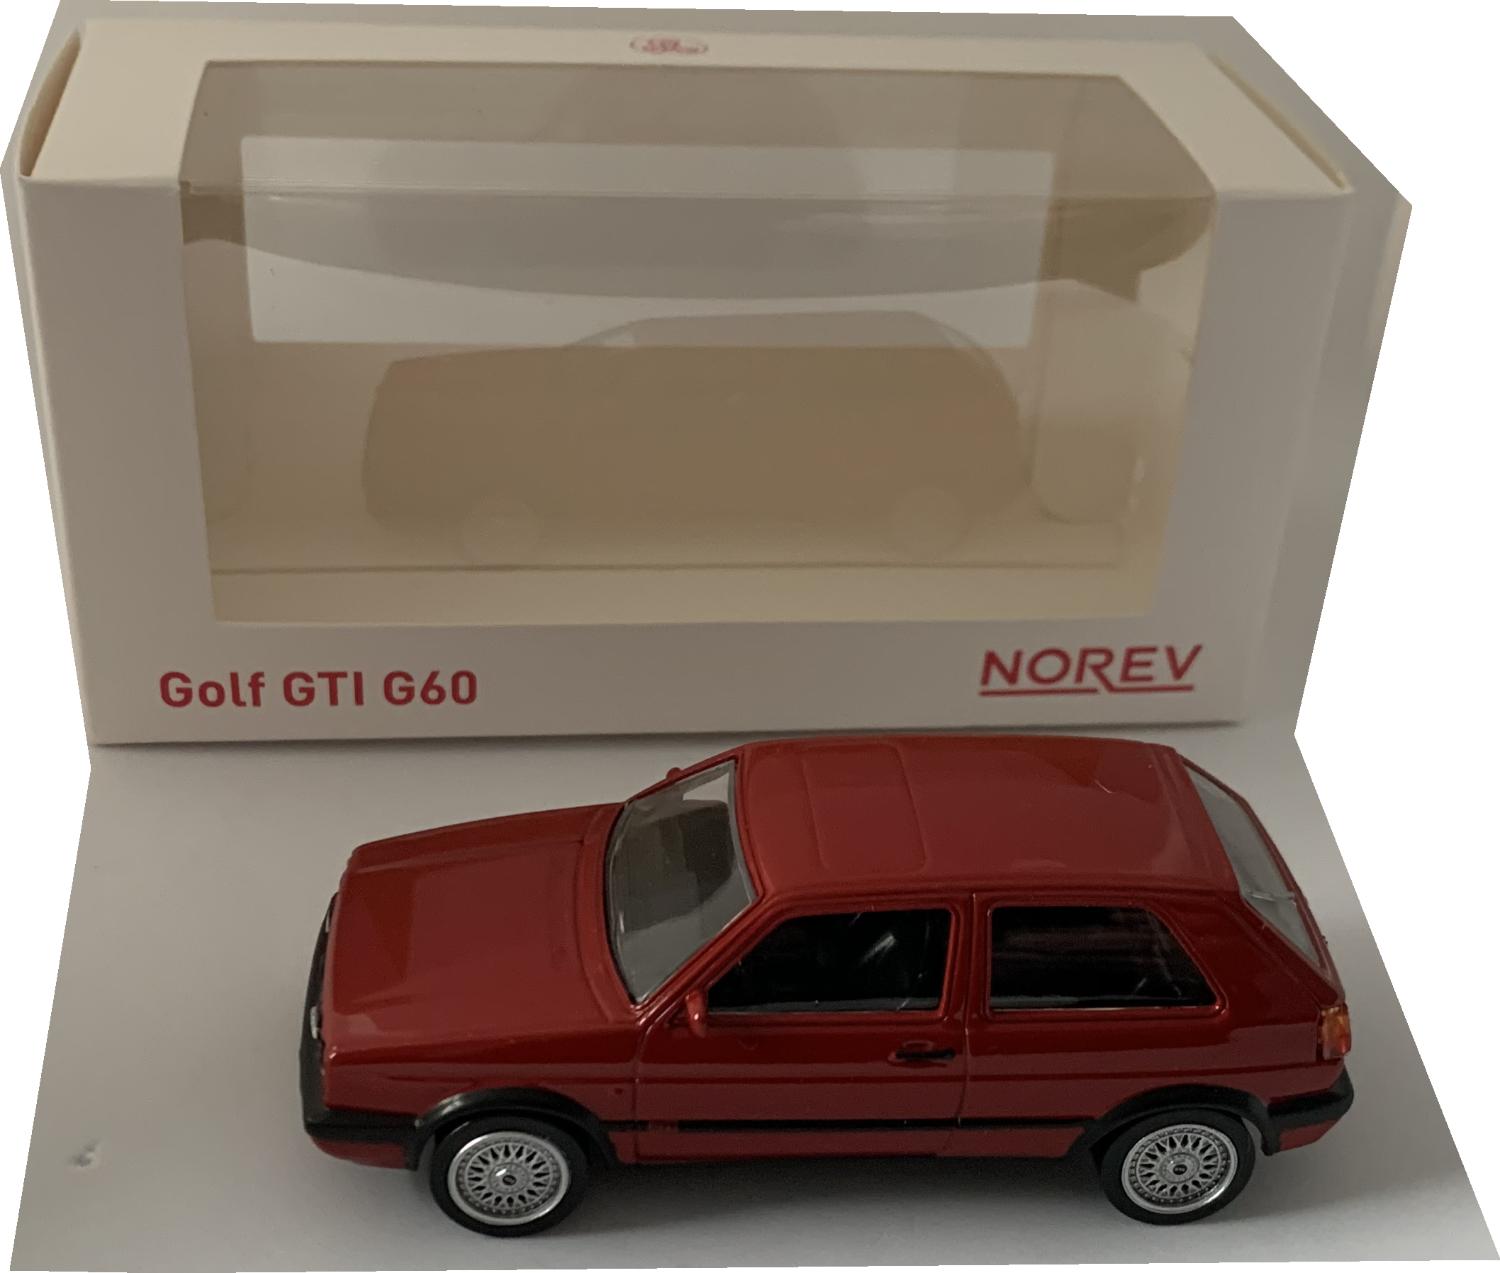 VW Golf GTI G60 1990 in red 1:43 scale model from Norev